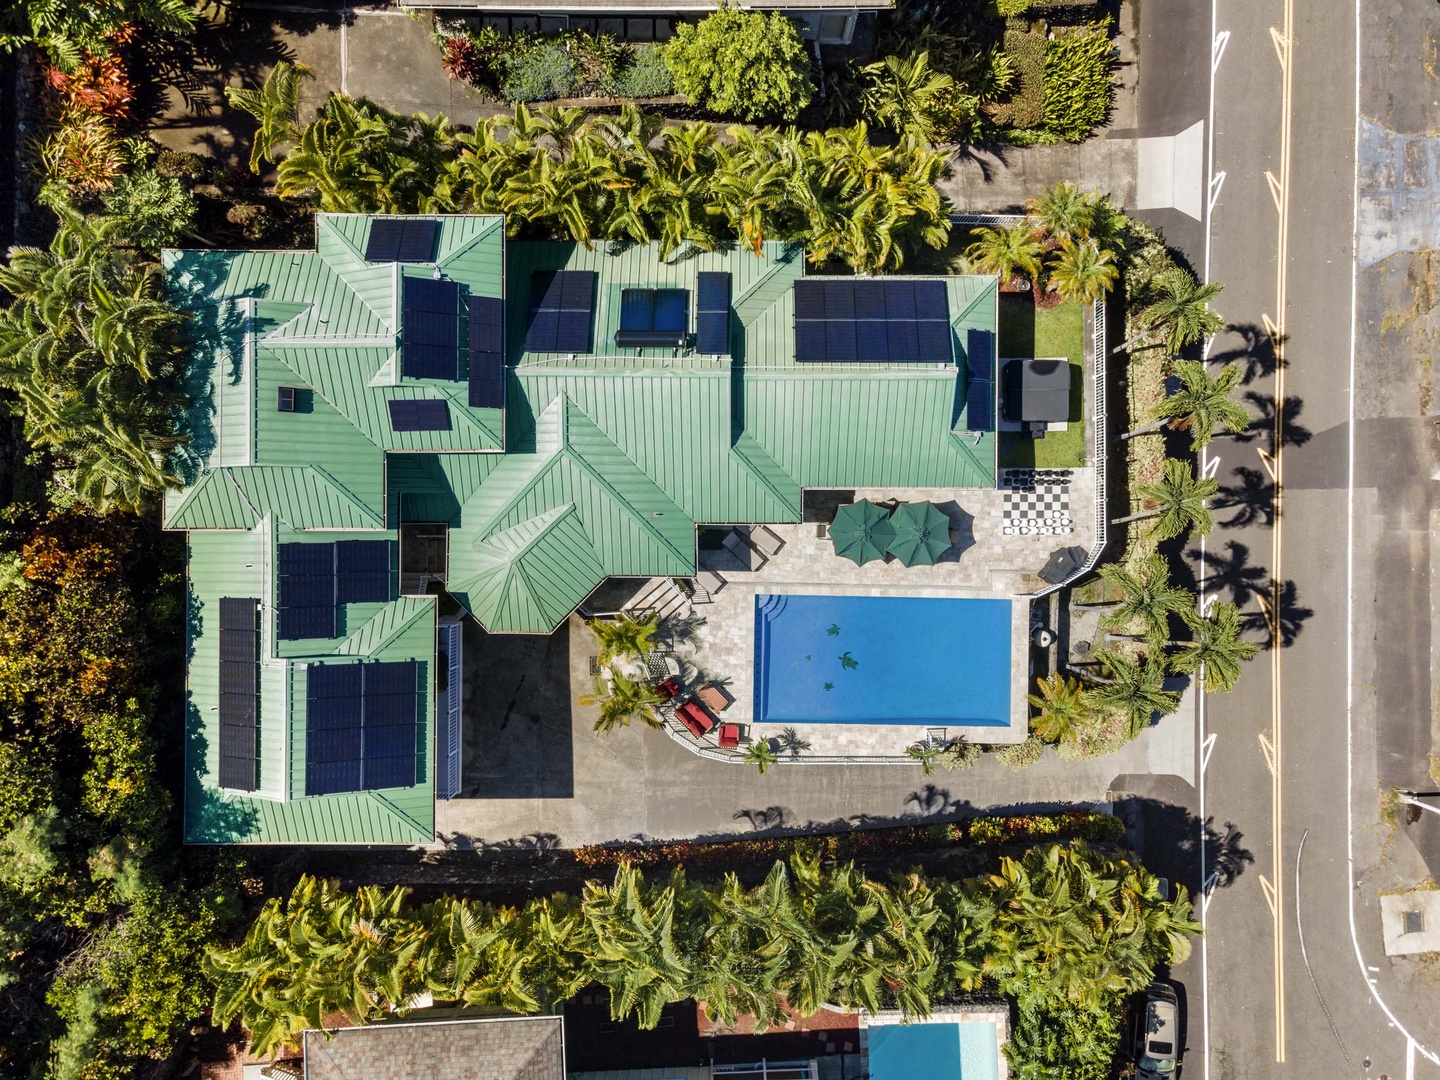 Kailua-Kona Vacation Rentals, Honu Hale - Aerial views showcasing our effort to stay green with solar